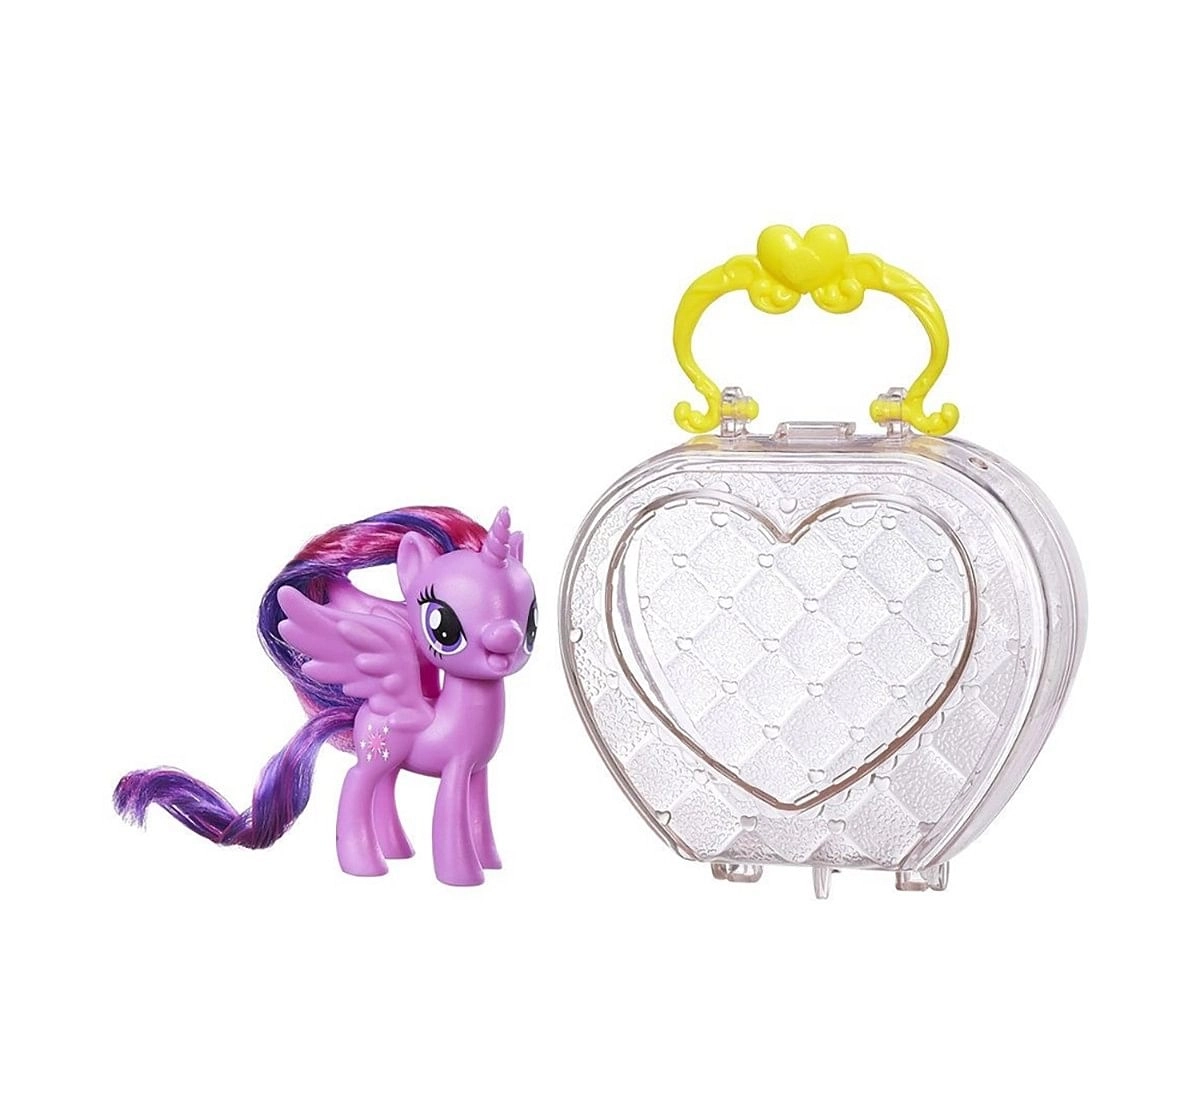  My Little Pony On-The-Go Purses Assorted Collectible Dolls for Girls age 3Y+ 